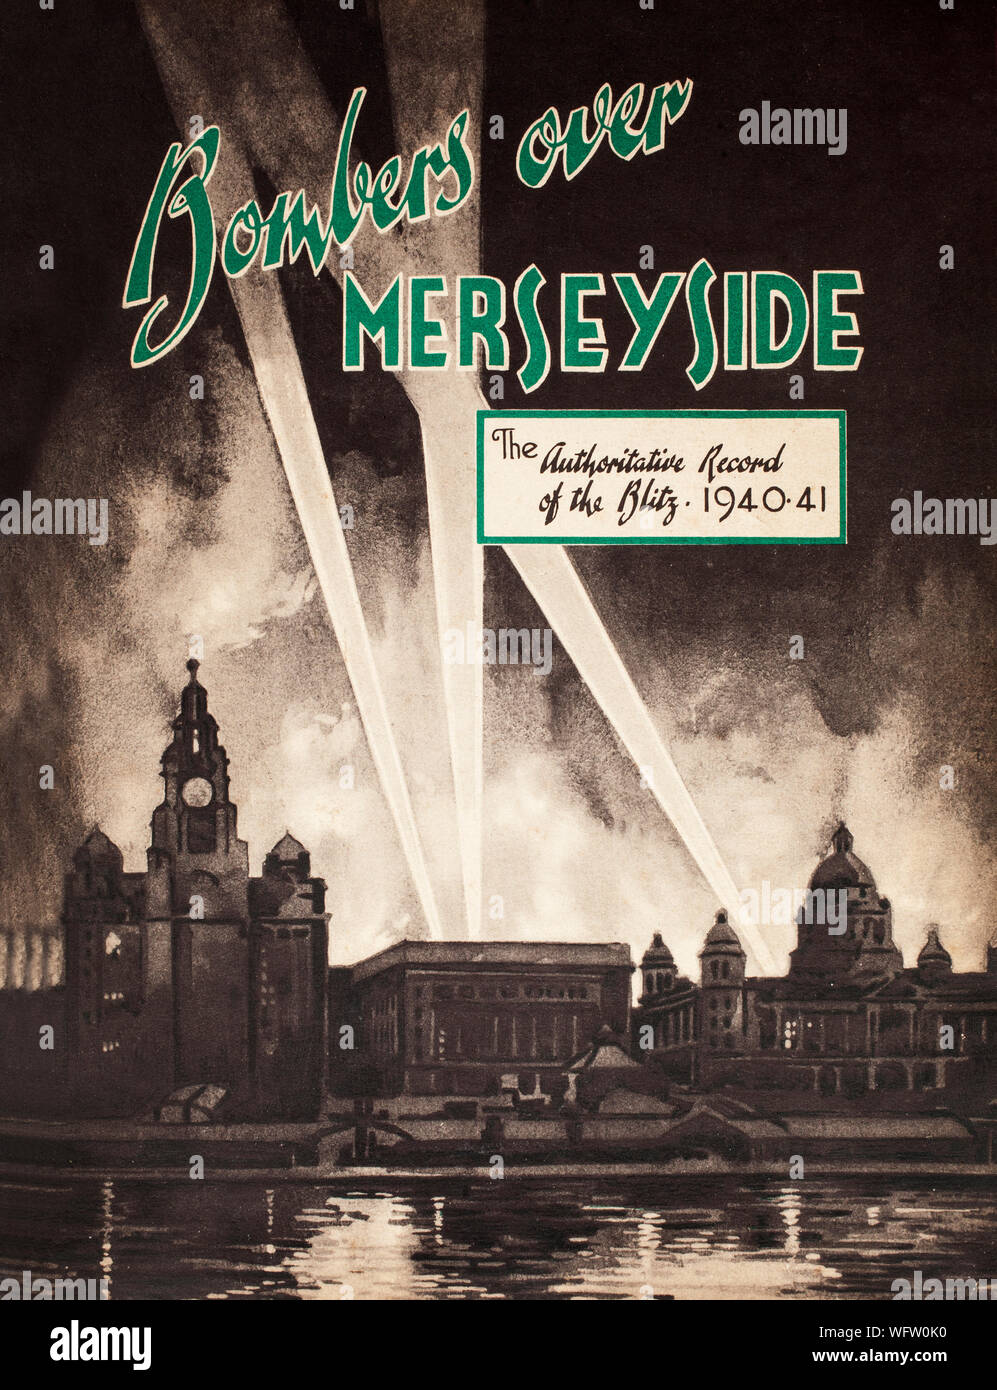 The cover of 'Bombers Over Merseyside',  featuring the 'Three Graces', from left, the Royal Liver Building, The Cunard Building and the Port of Liverpool Building at the Pier Head.  In the background, search lights penetrate the smoke from fires caused by high explosive and incendiary bombs dropped by German bombers during the blitz on Liverpool and surrounding area between August 1940 and January 1942. Stock Photo